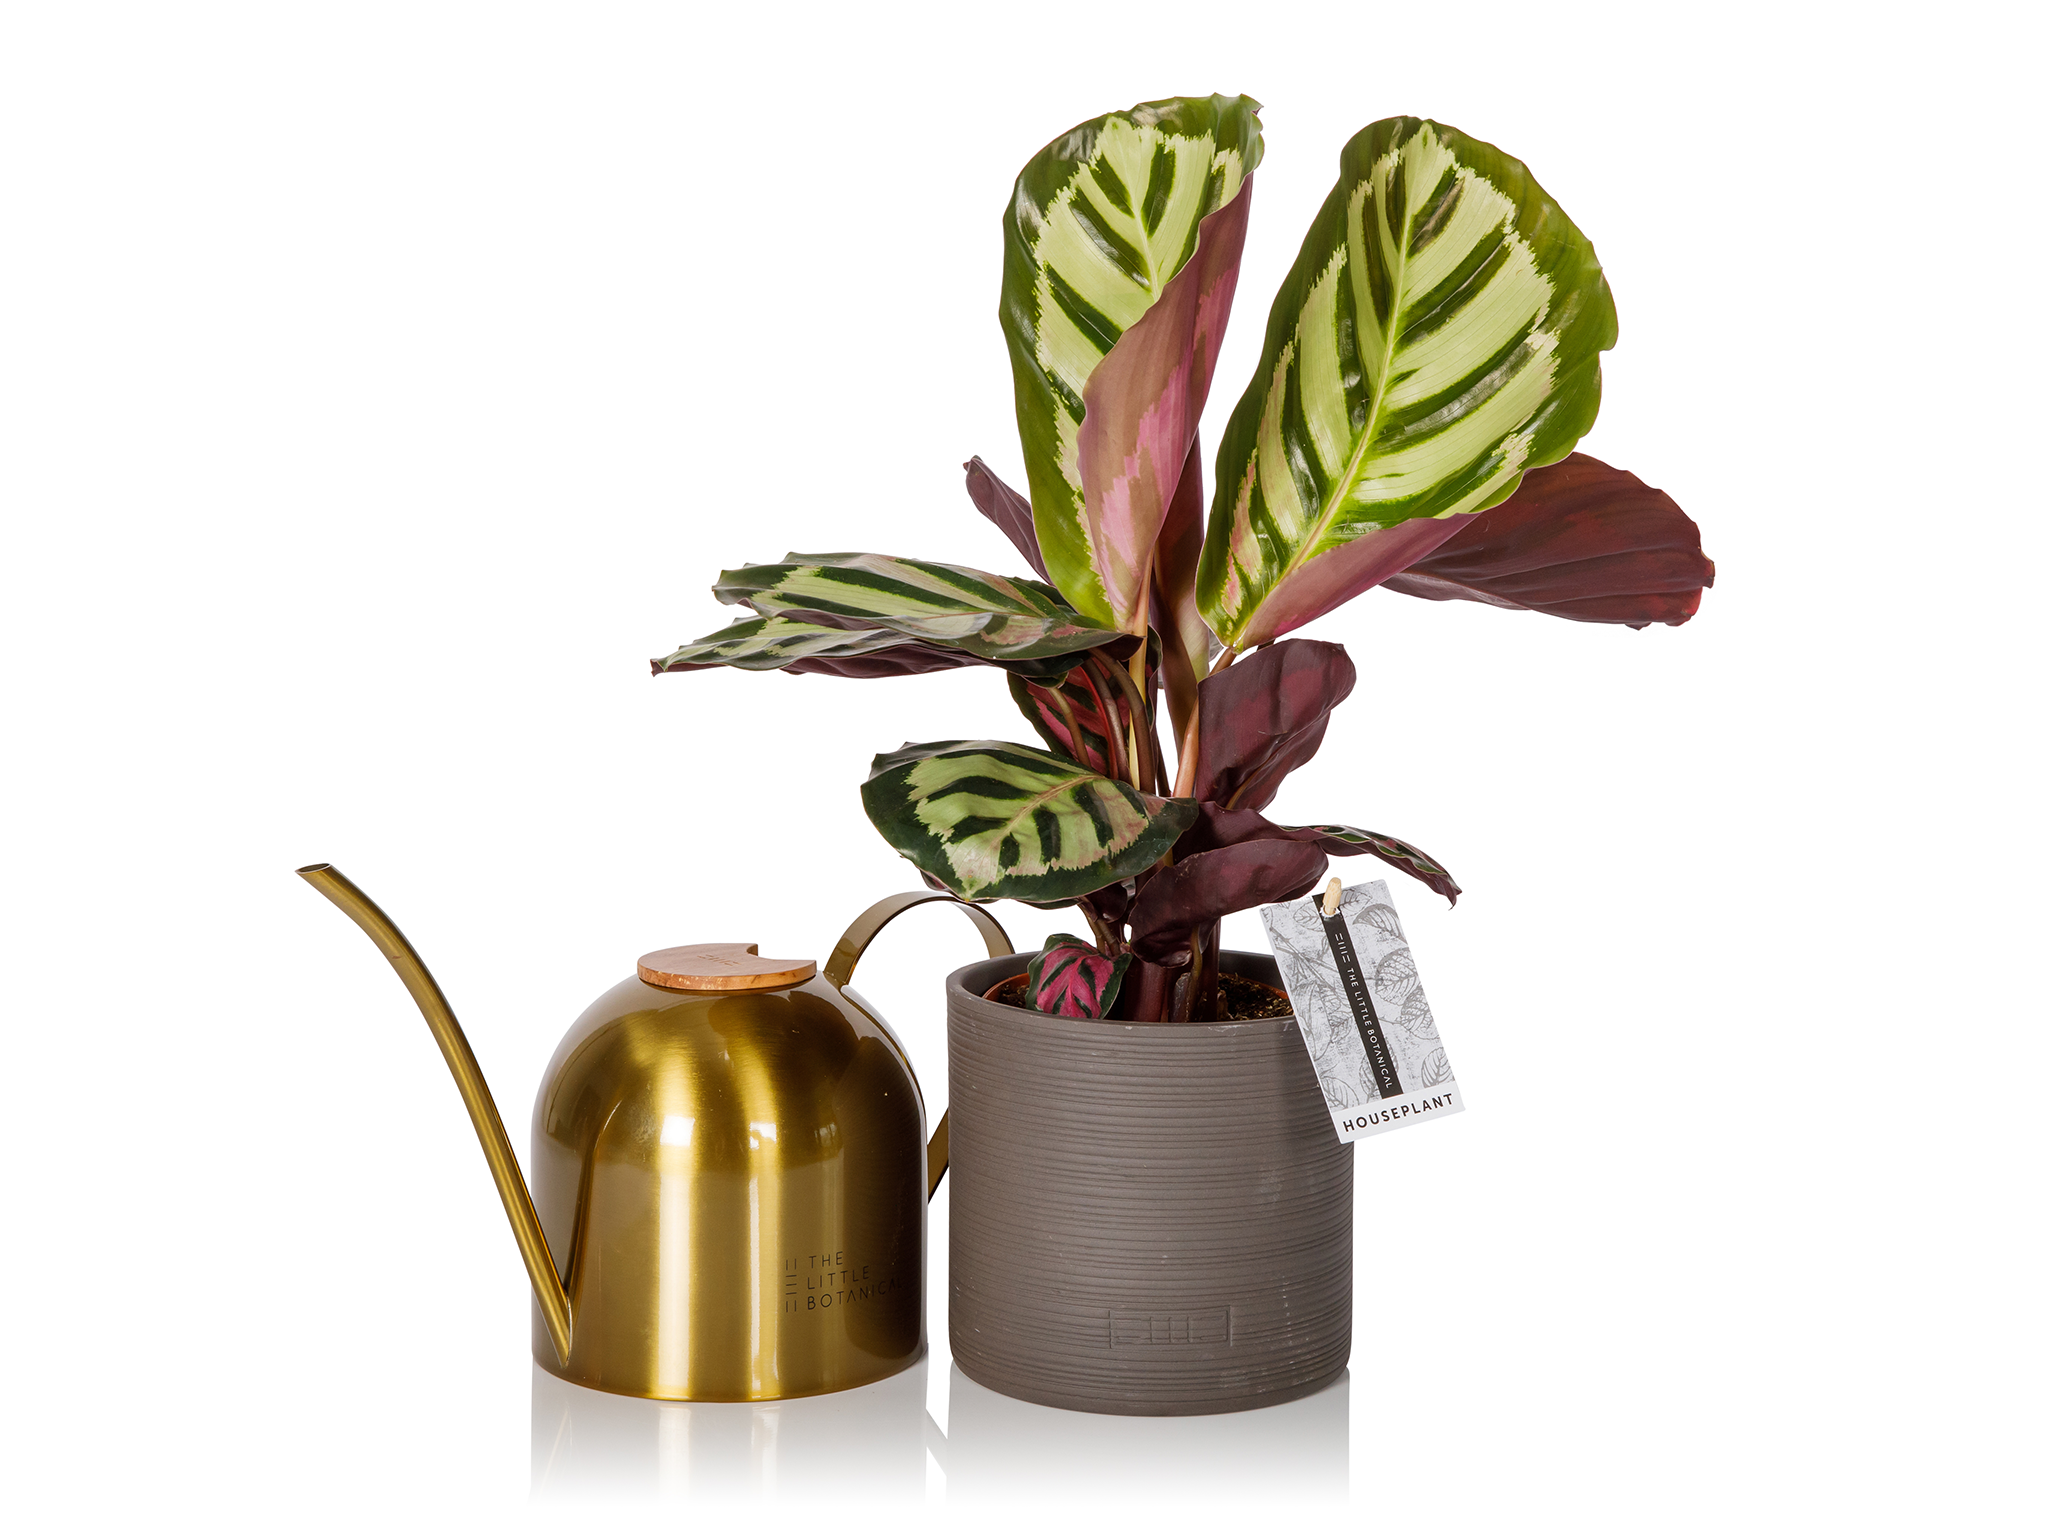 The Little Botanical Euphrates watering can and calathea gift set